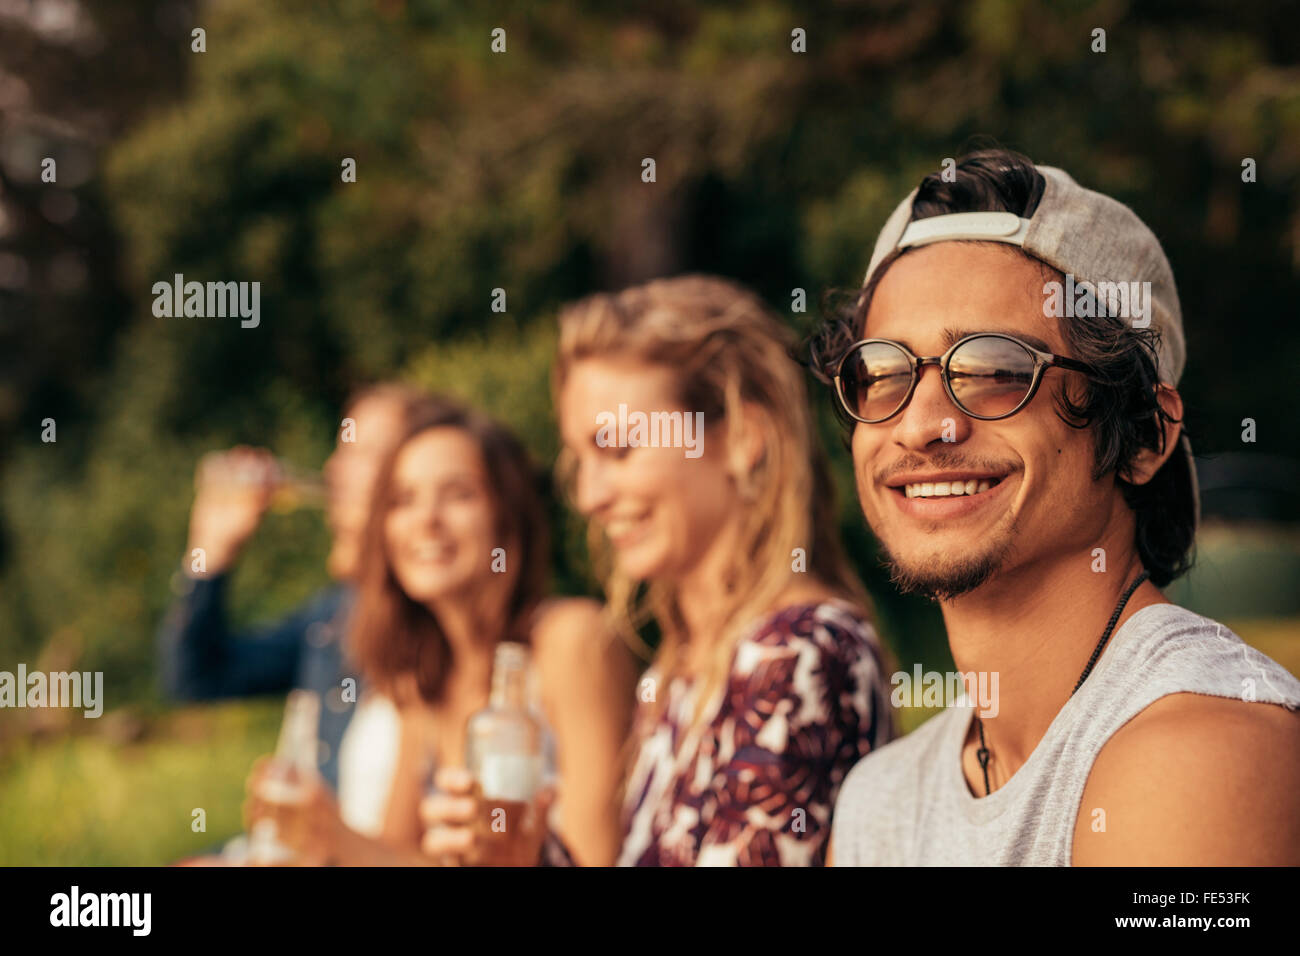 Portrait of happy young man at a lake with friends sitting by. Young friends hanging out at the lake. Stock Photo